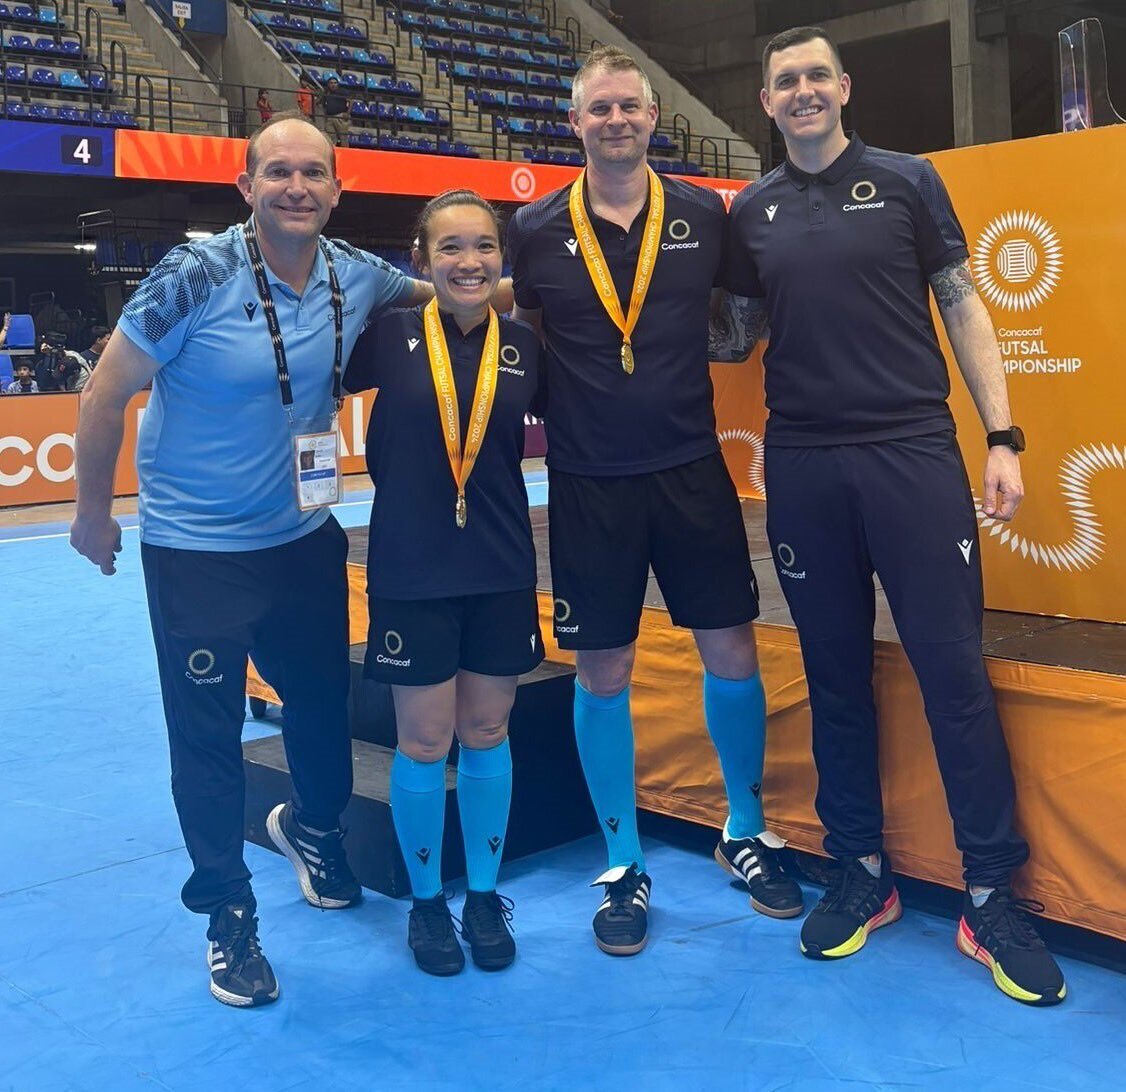 Congrats to the U.S. Soccer Referee trio of Josh Wilkins, Krystin Pahia, and Matthew Rodman who officiated decisive matches at the recently concluded @Concacaf Futsal Championship in Nicaragua.